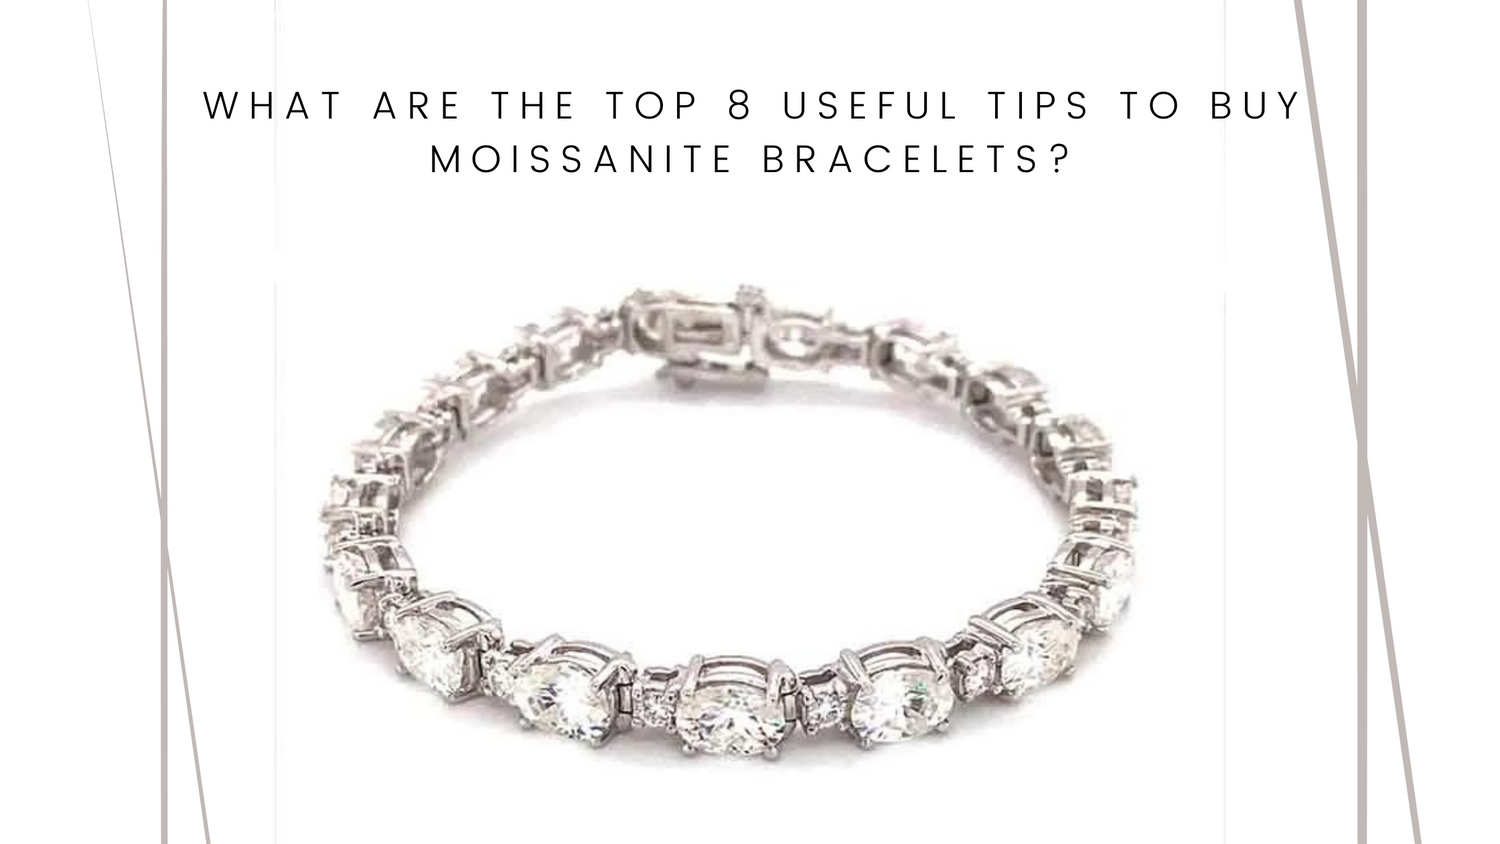 What Are the Top 8 Useful Tips to Buy Moissanite Bracelets?